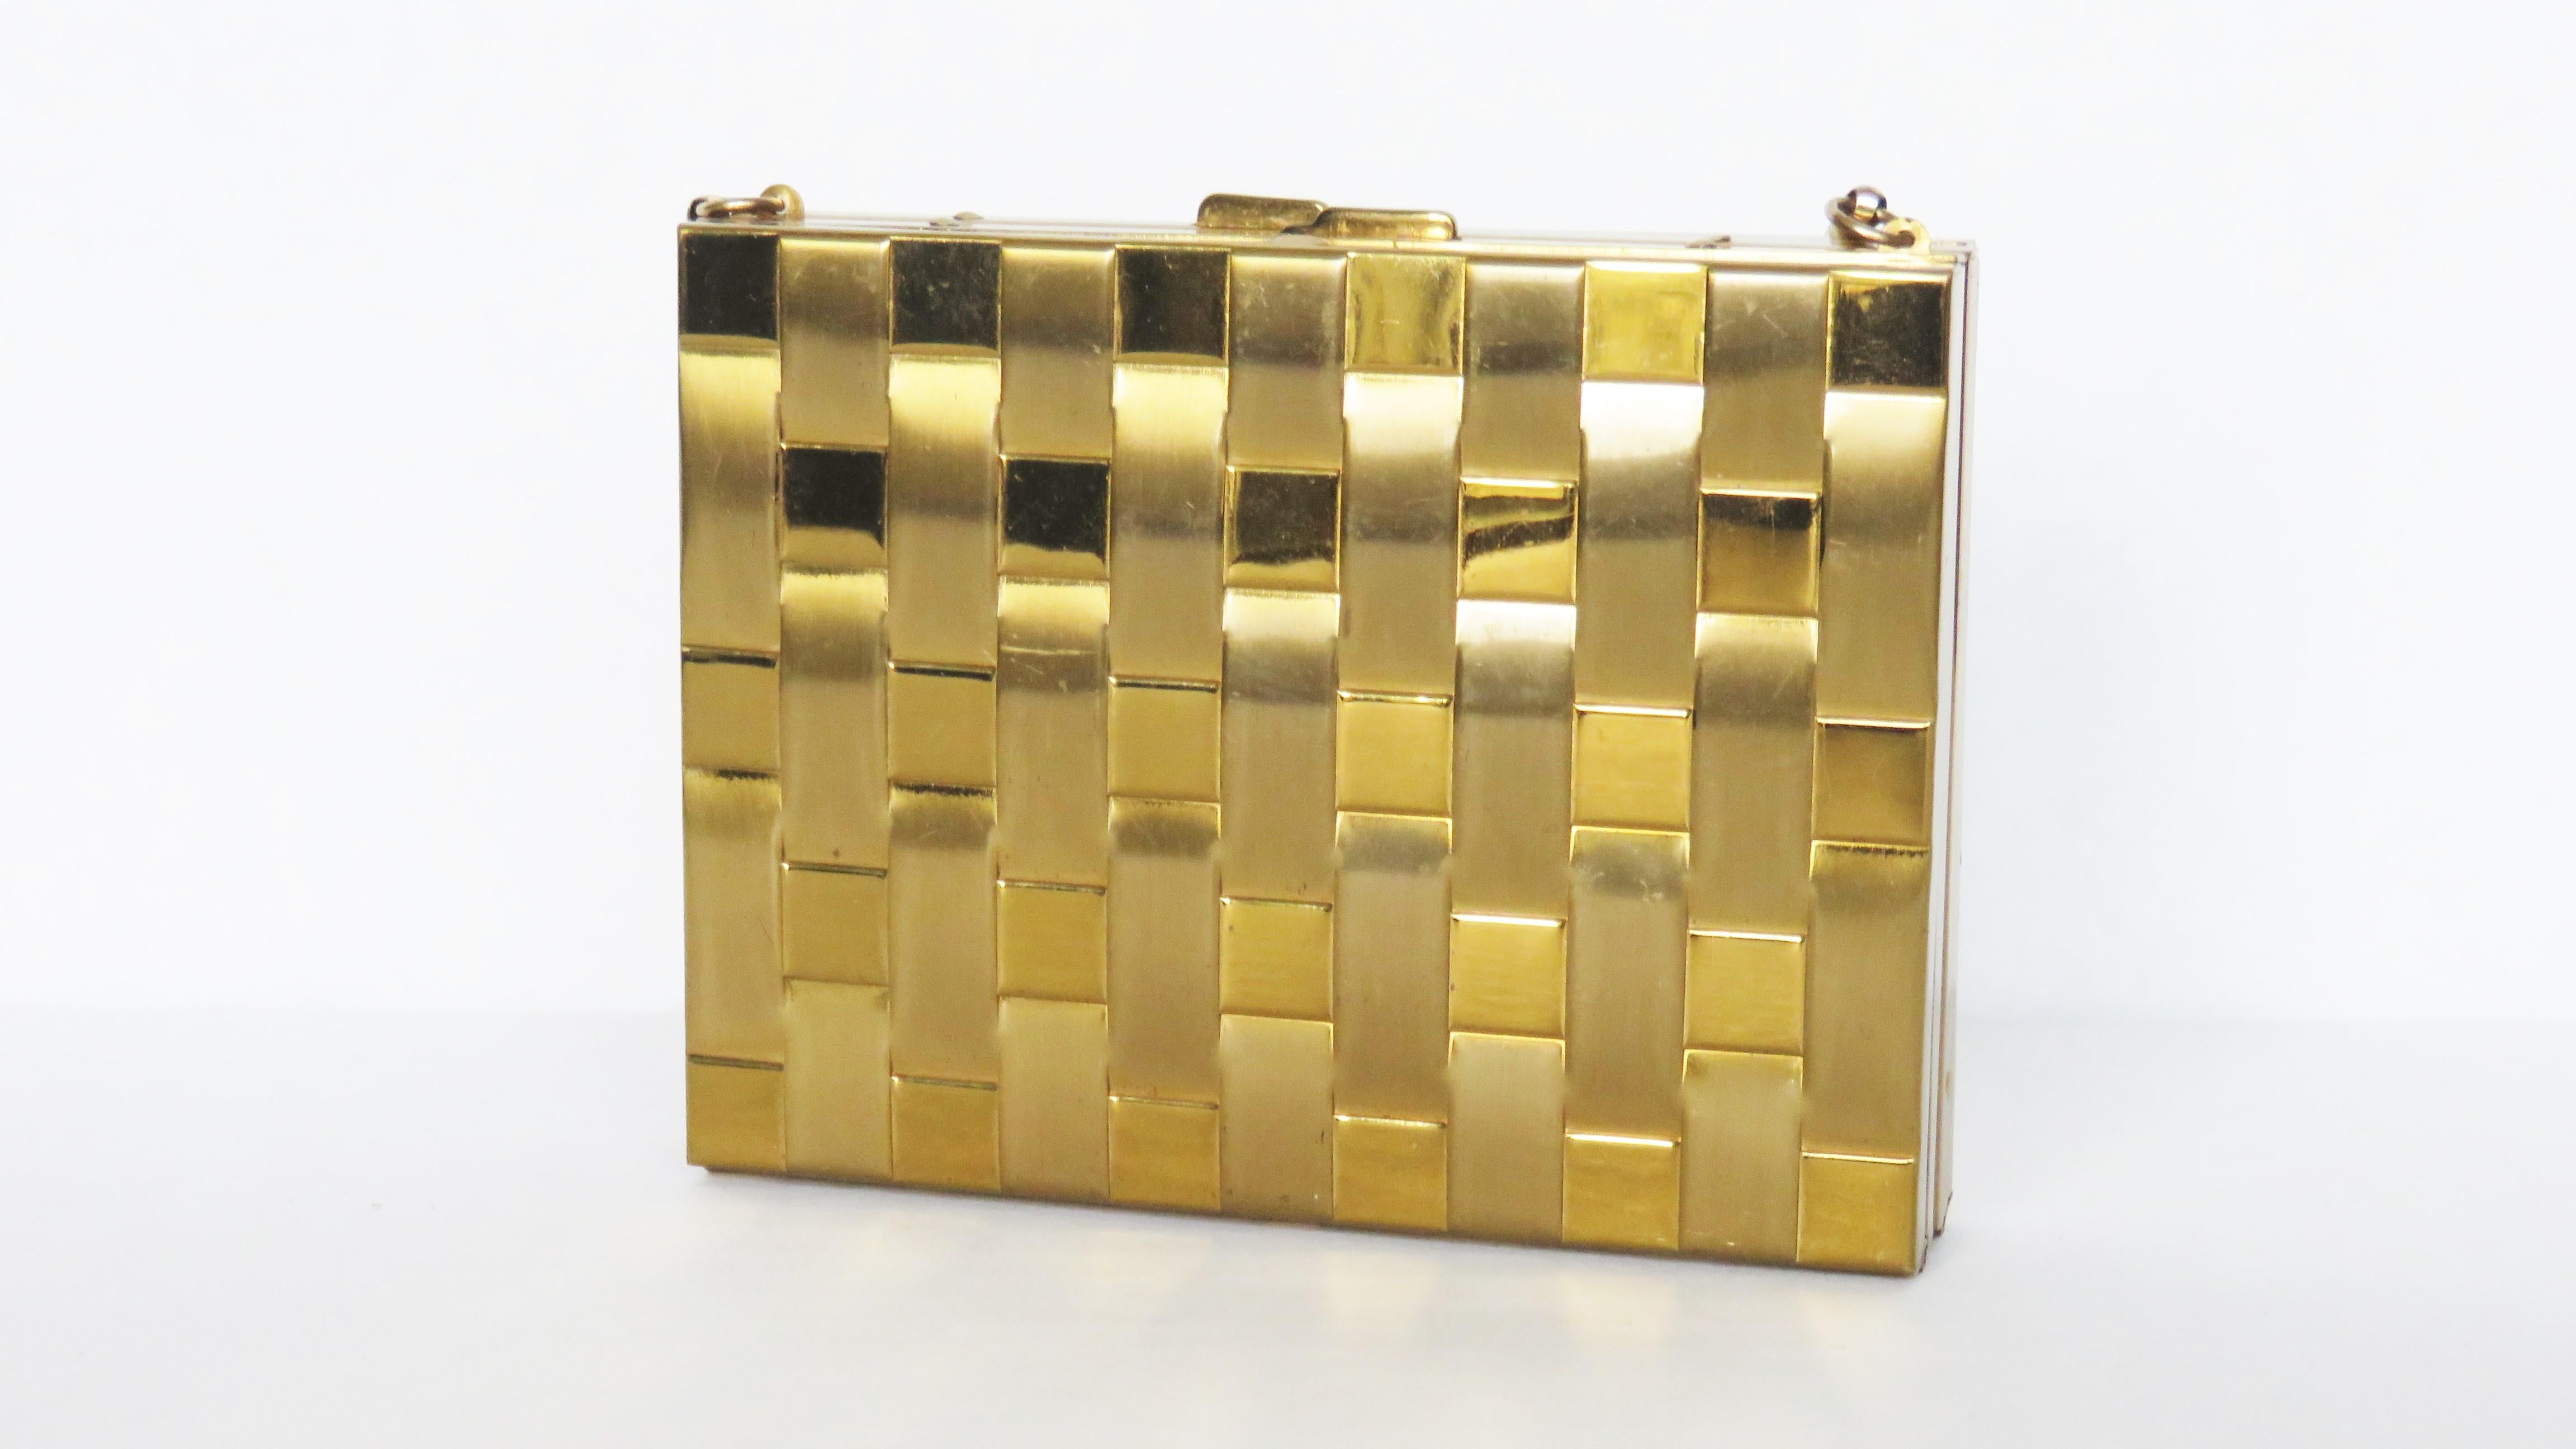 This is a fabulous a compartment compact purse in a striking woven gold tone metal pattern.  It has release buttons on top for both sides with one side opening to a mirror, place for powder, comb and lipstick holder and the other side an elaborate